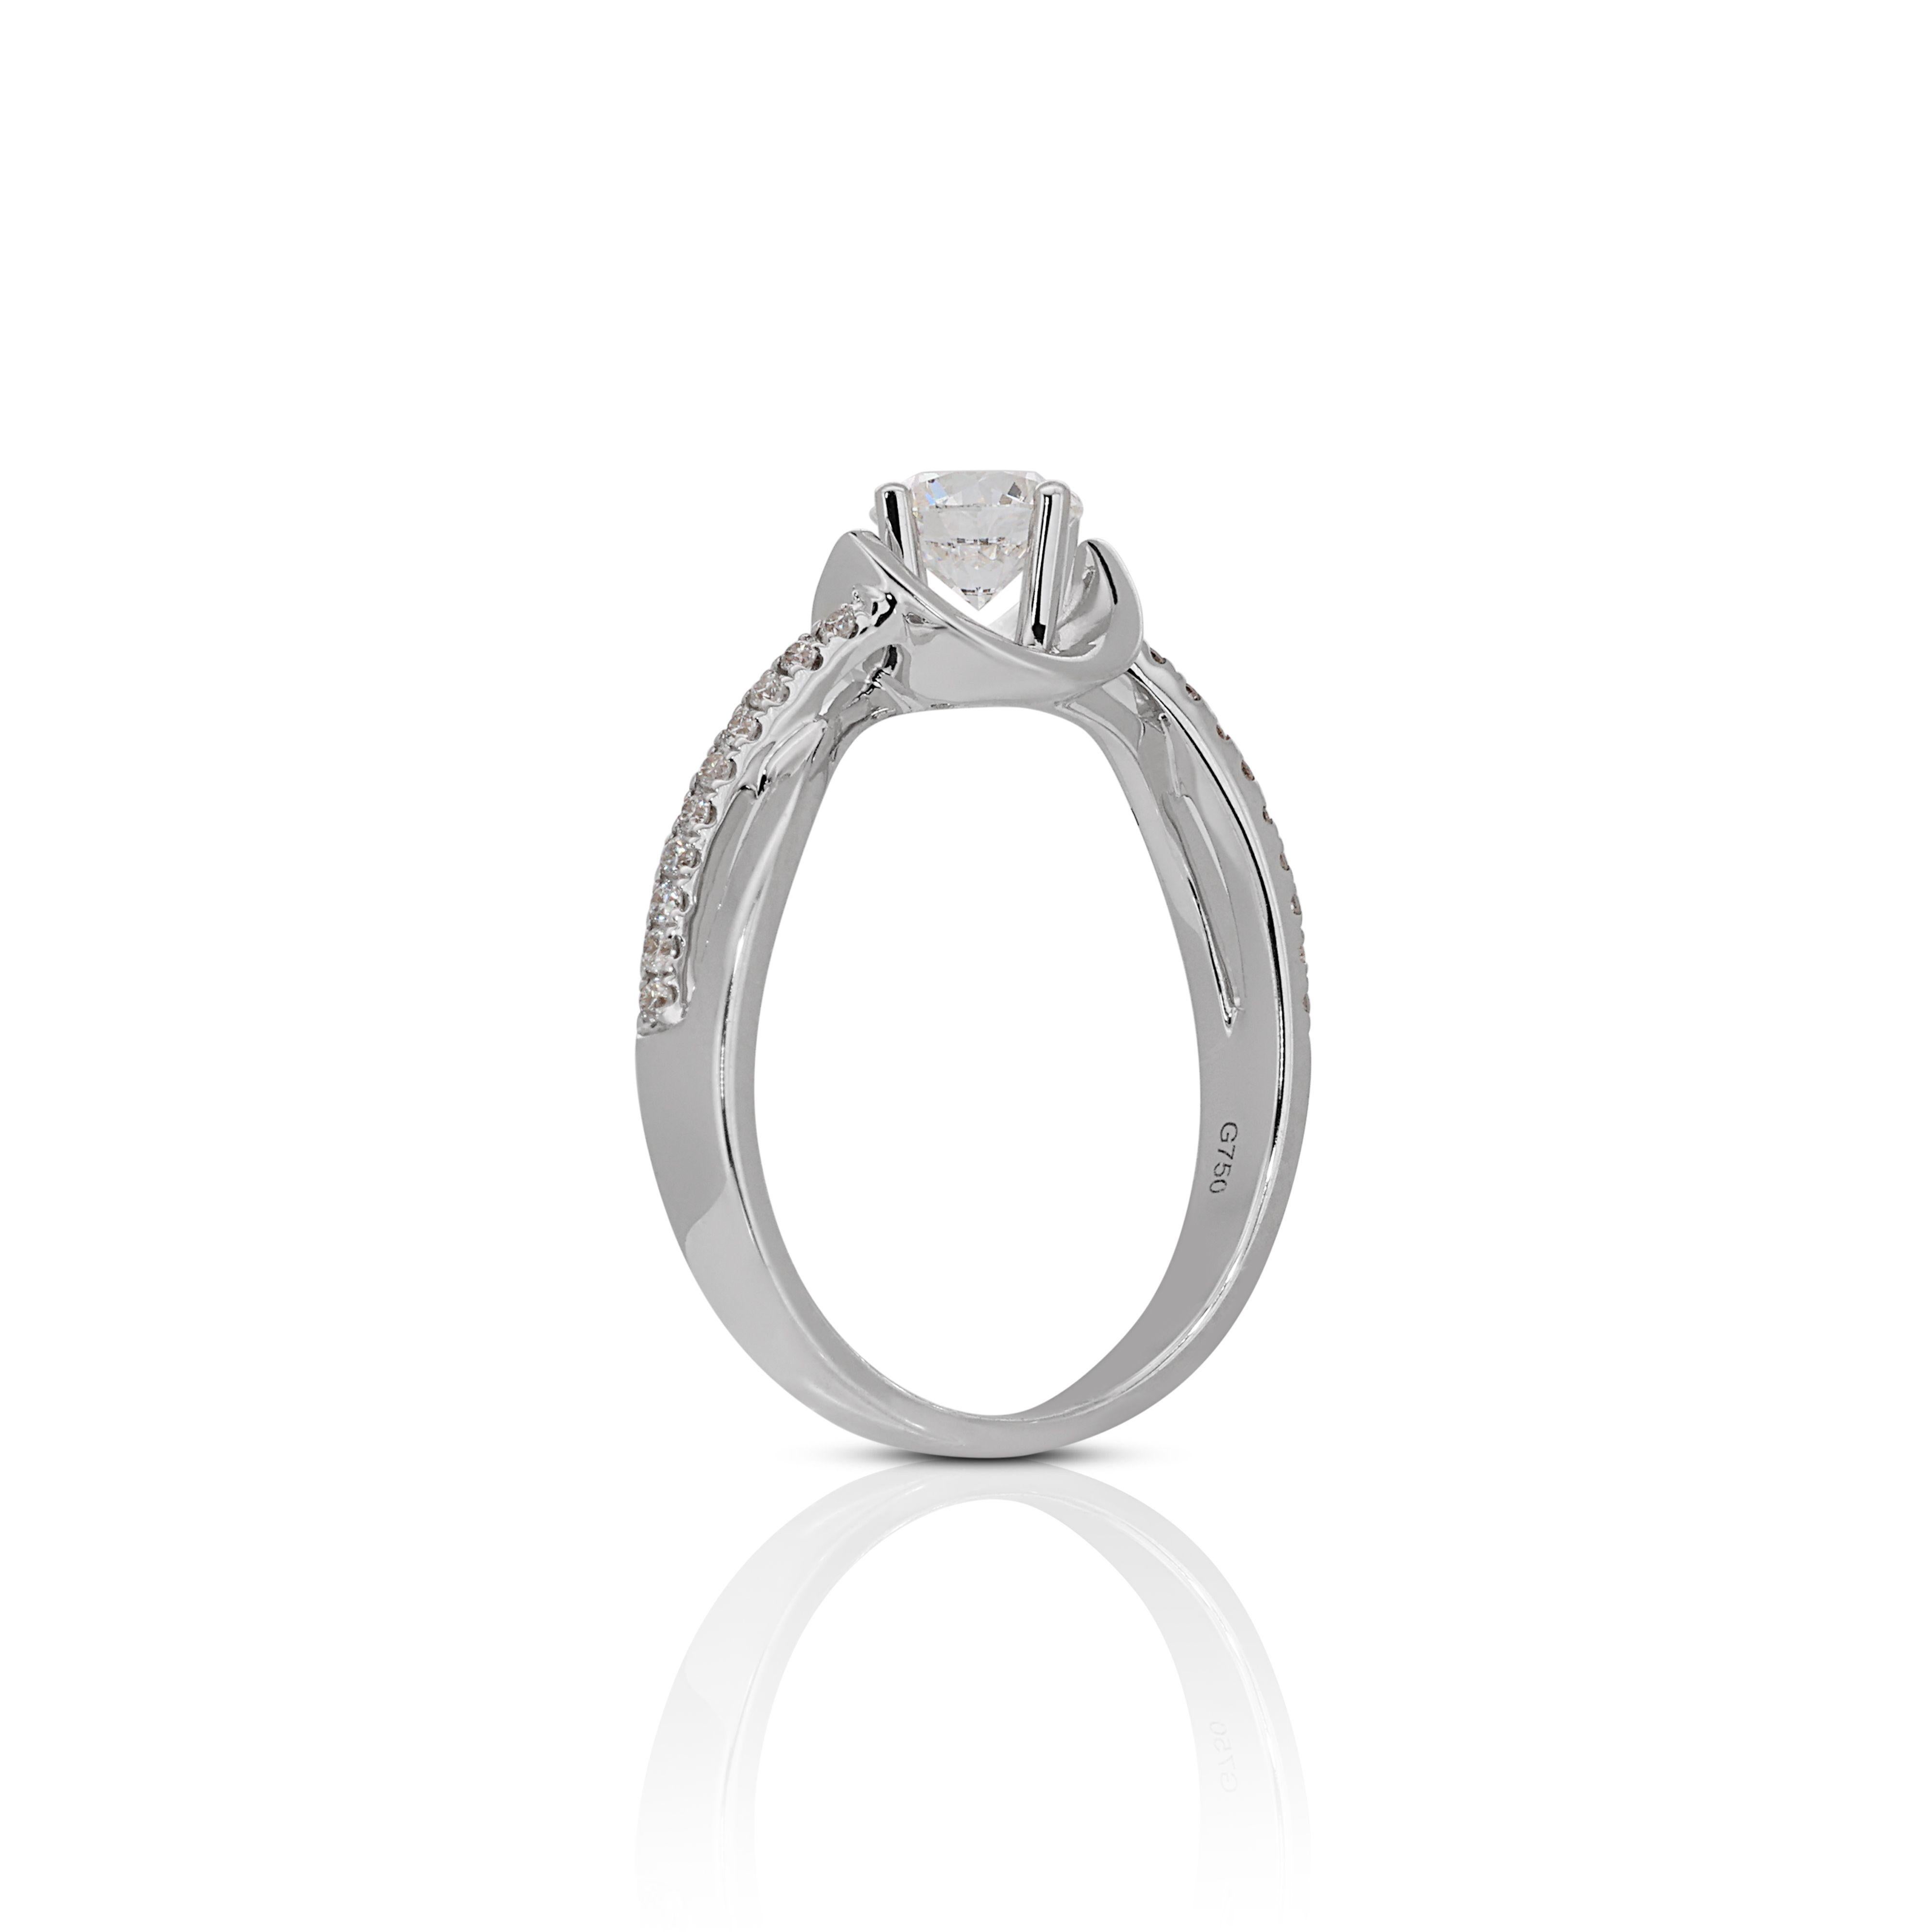 Women's Beautiful 18K White Gold Halo Diamond Ring with 0.50ct Natural Diamond For Sale